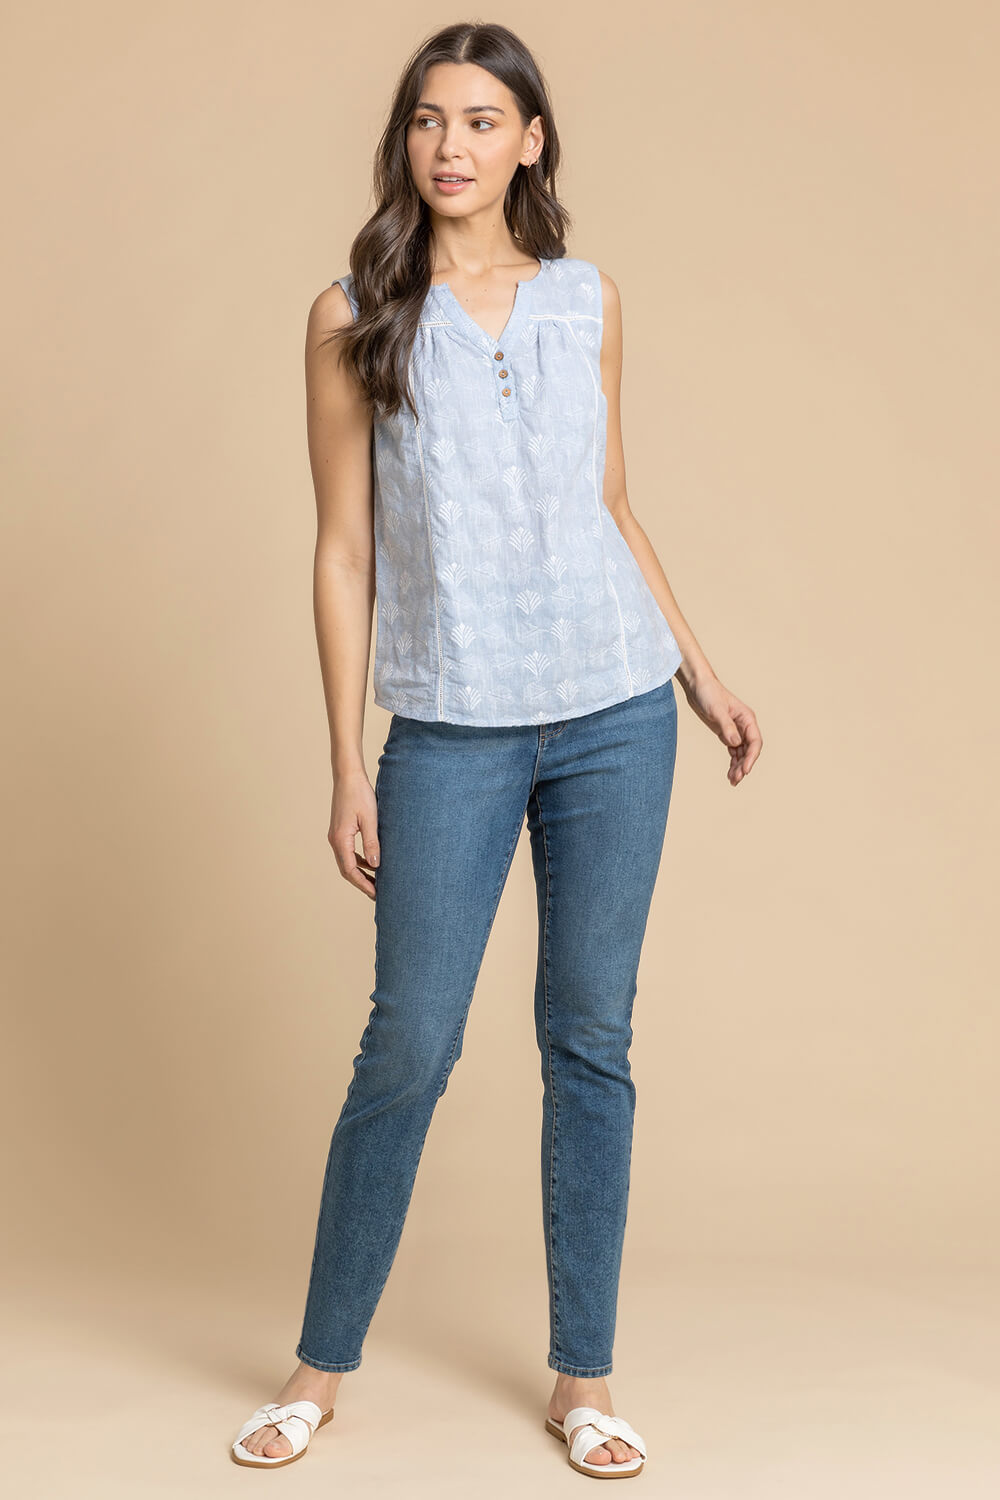 Light Blue  Sleeveless Embroidered Cotton Blouse, Image 2 of 4